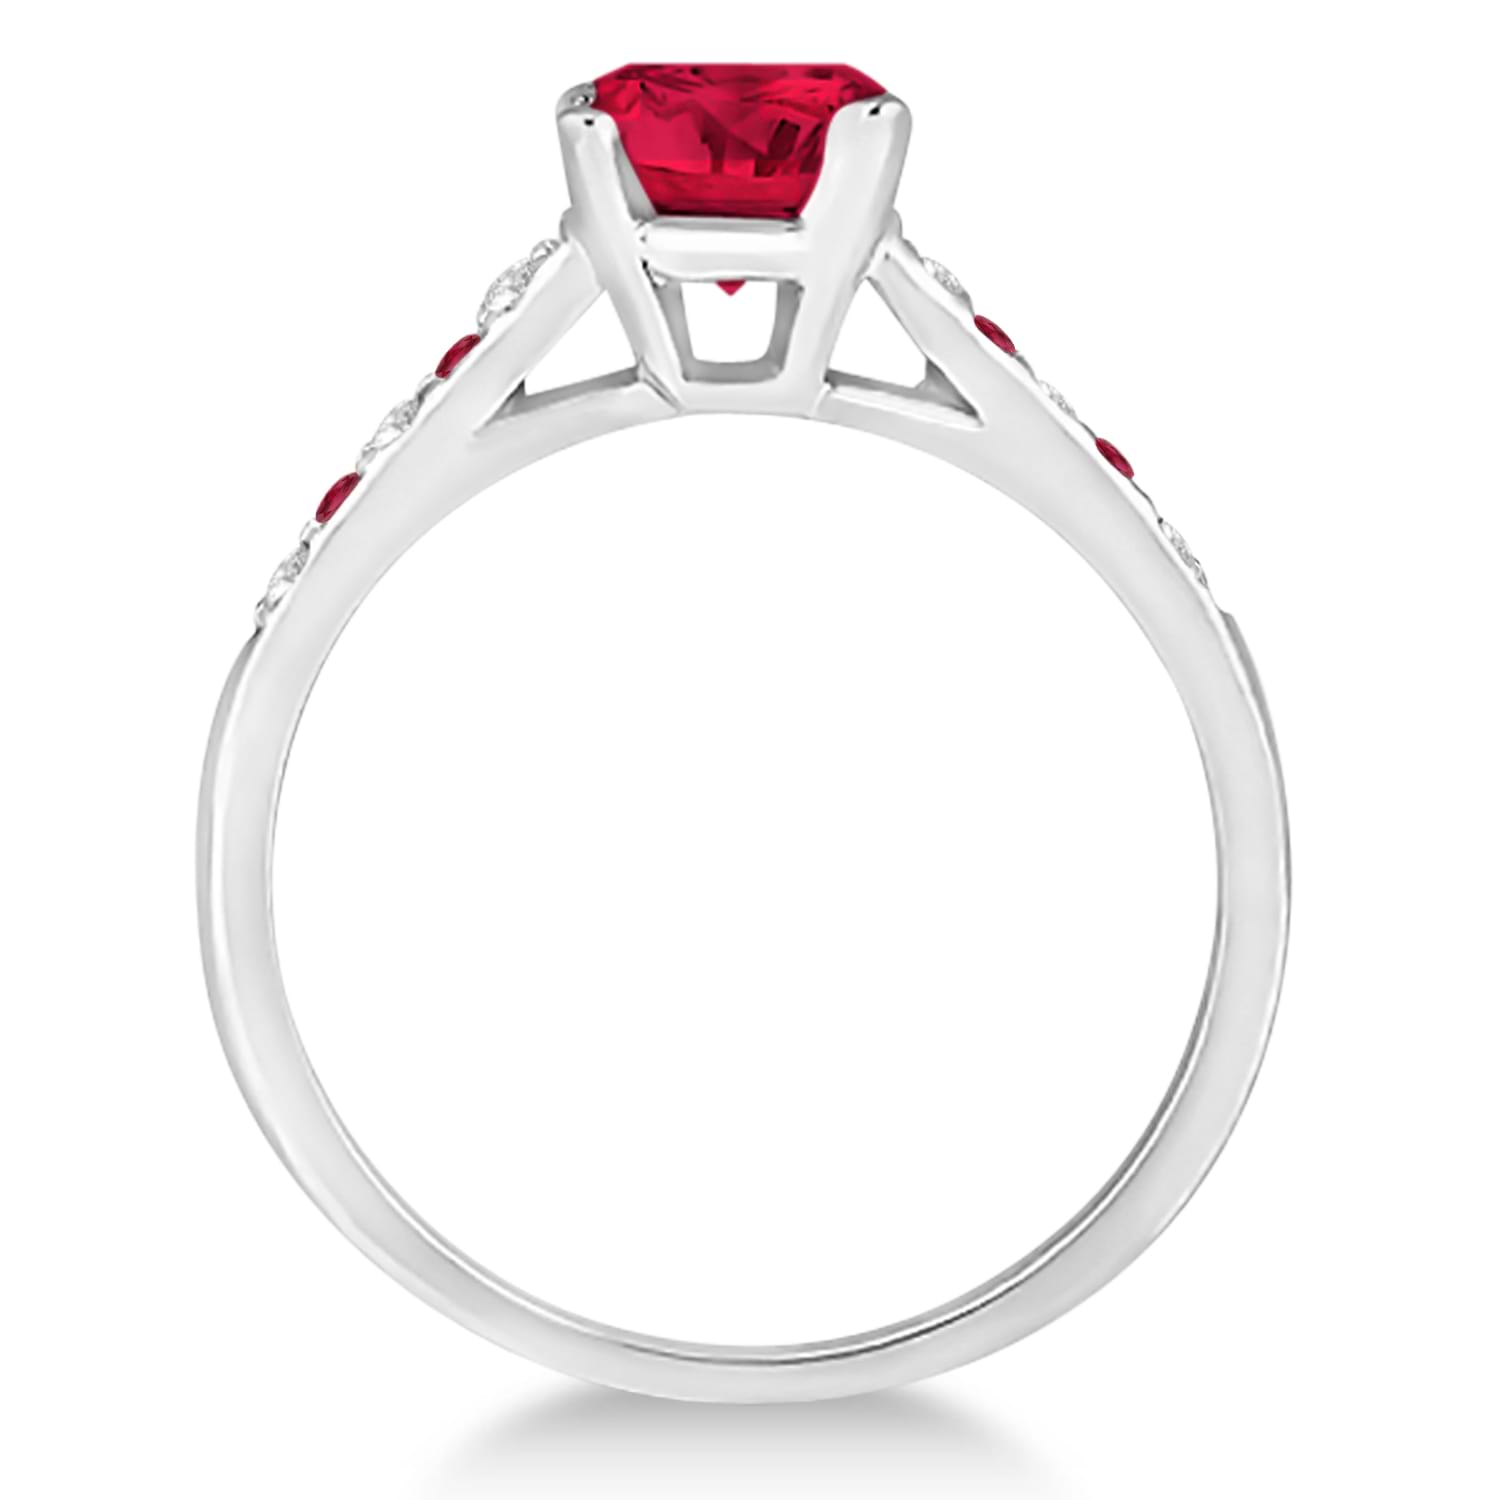 Cathedral Ruby & Diamond Engagement Ring 14k White Gold (1.20ct)